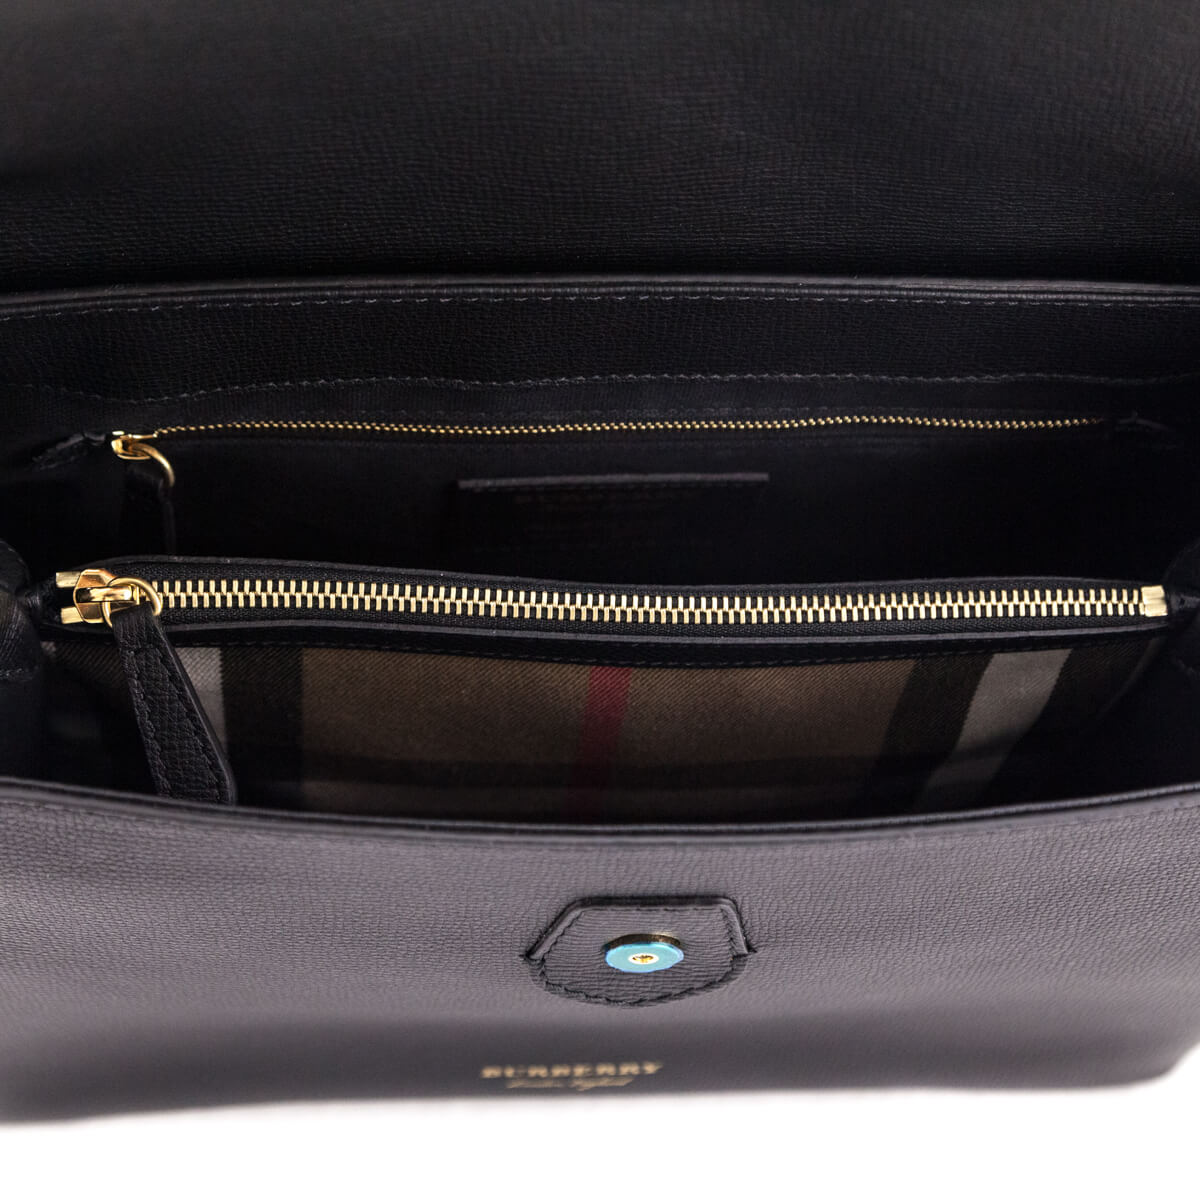 Burberry Black Derby Calfskin House Check Medium Camberley Satchel - Love that Bag etc - Preowned Authentic Designer Handbags & Preloved Fashions